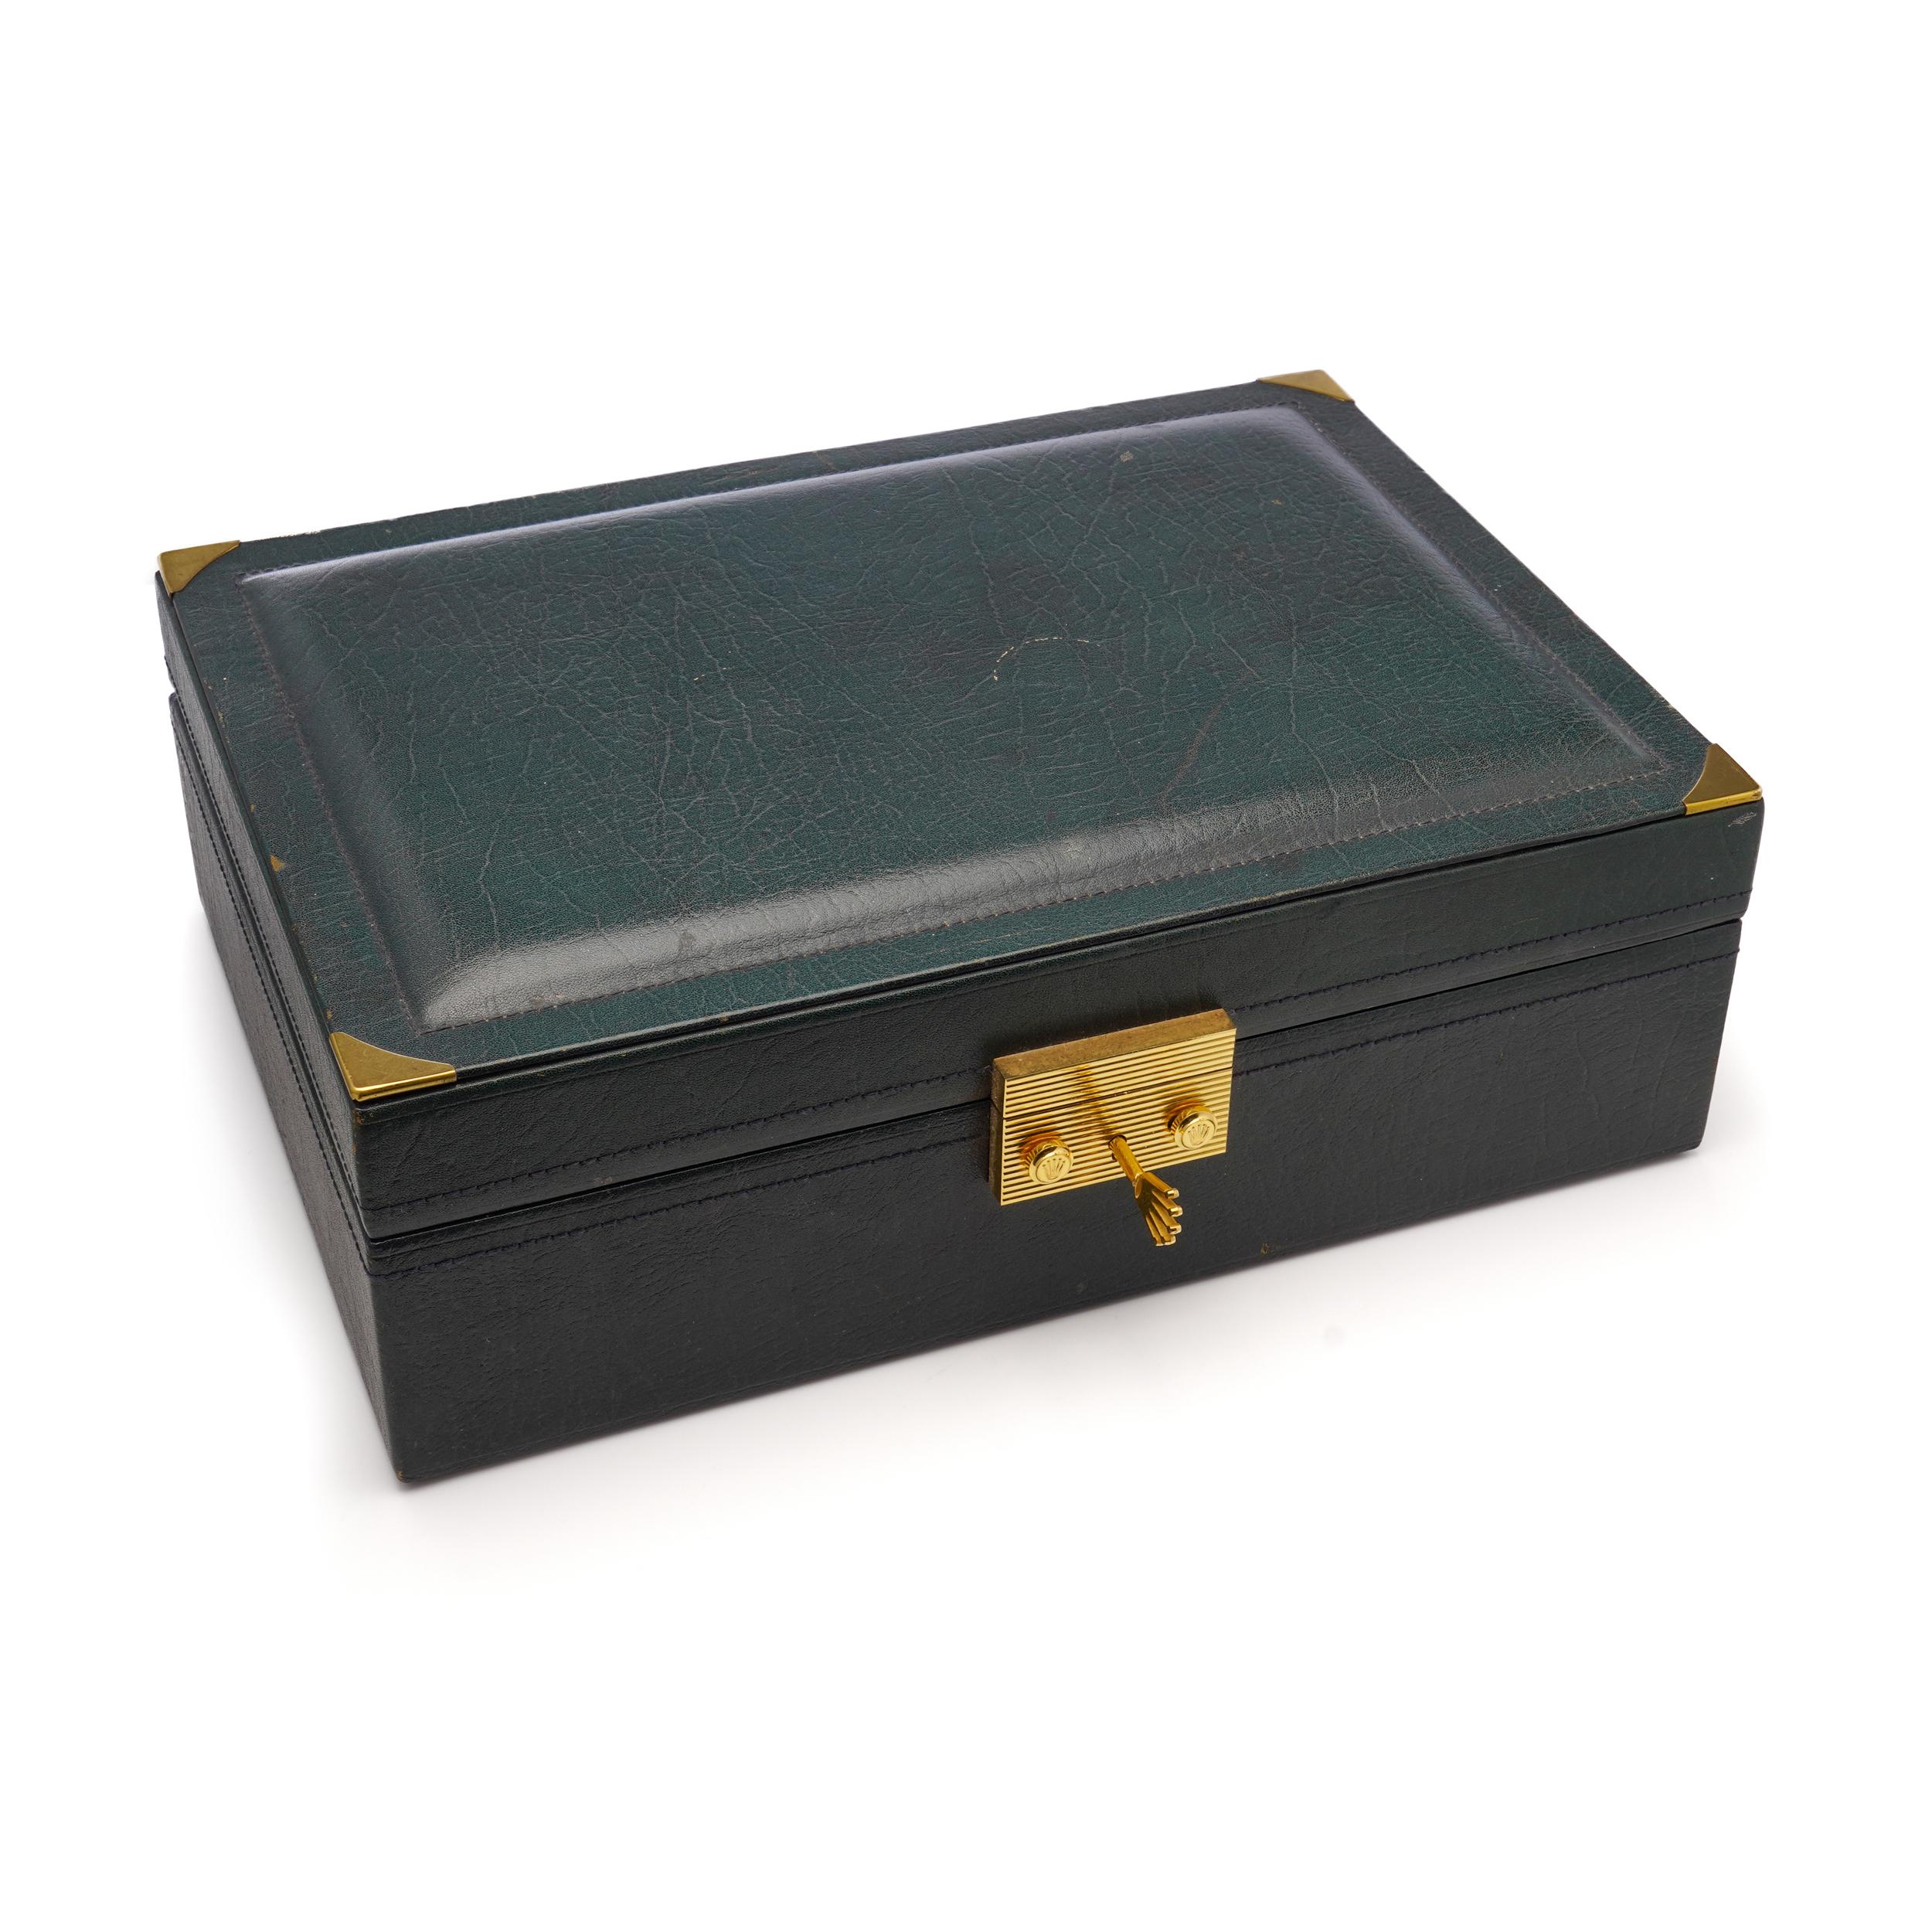 20th Century Rolex Jumbo vintage classic green leather presentation watch and jewellery box